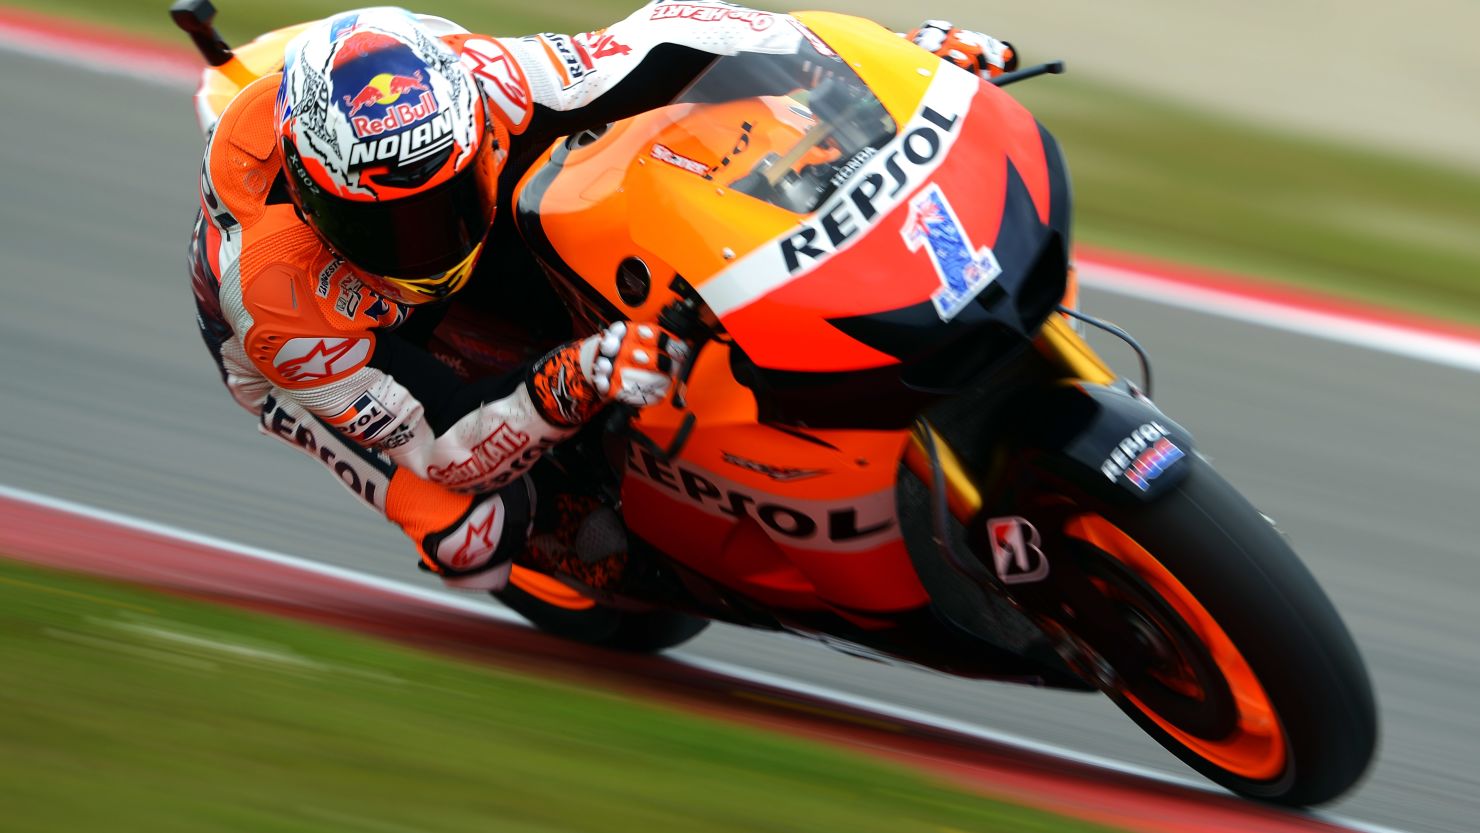  Australian motorcyclist Casey Stoner bounced back to set the pace in Friday's qualifying session in Assen.